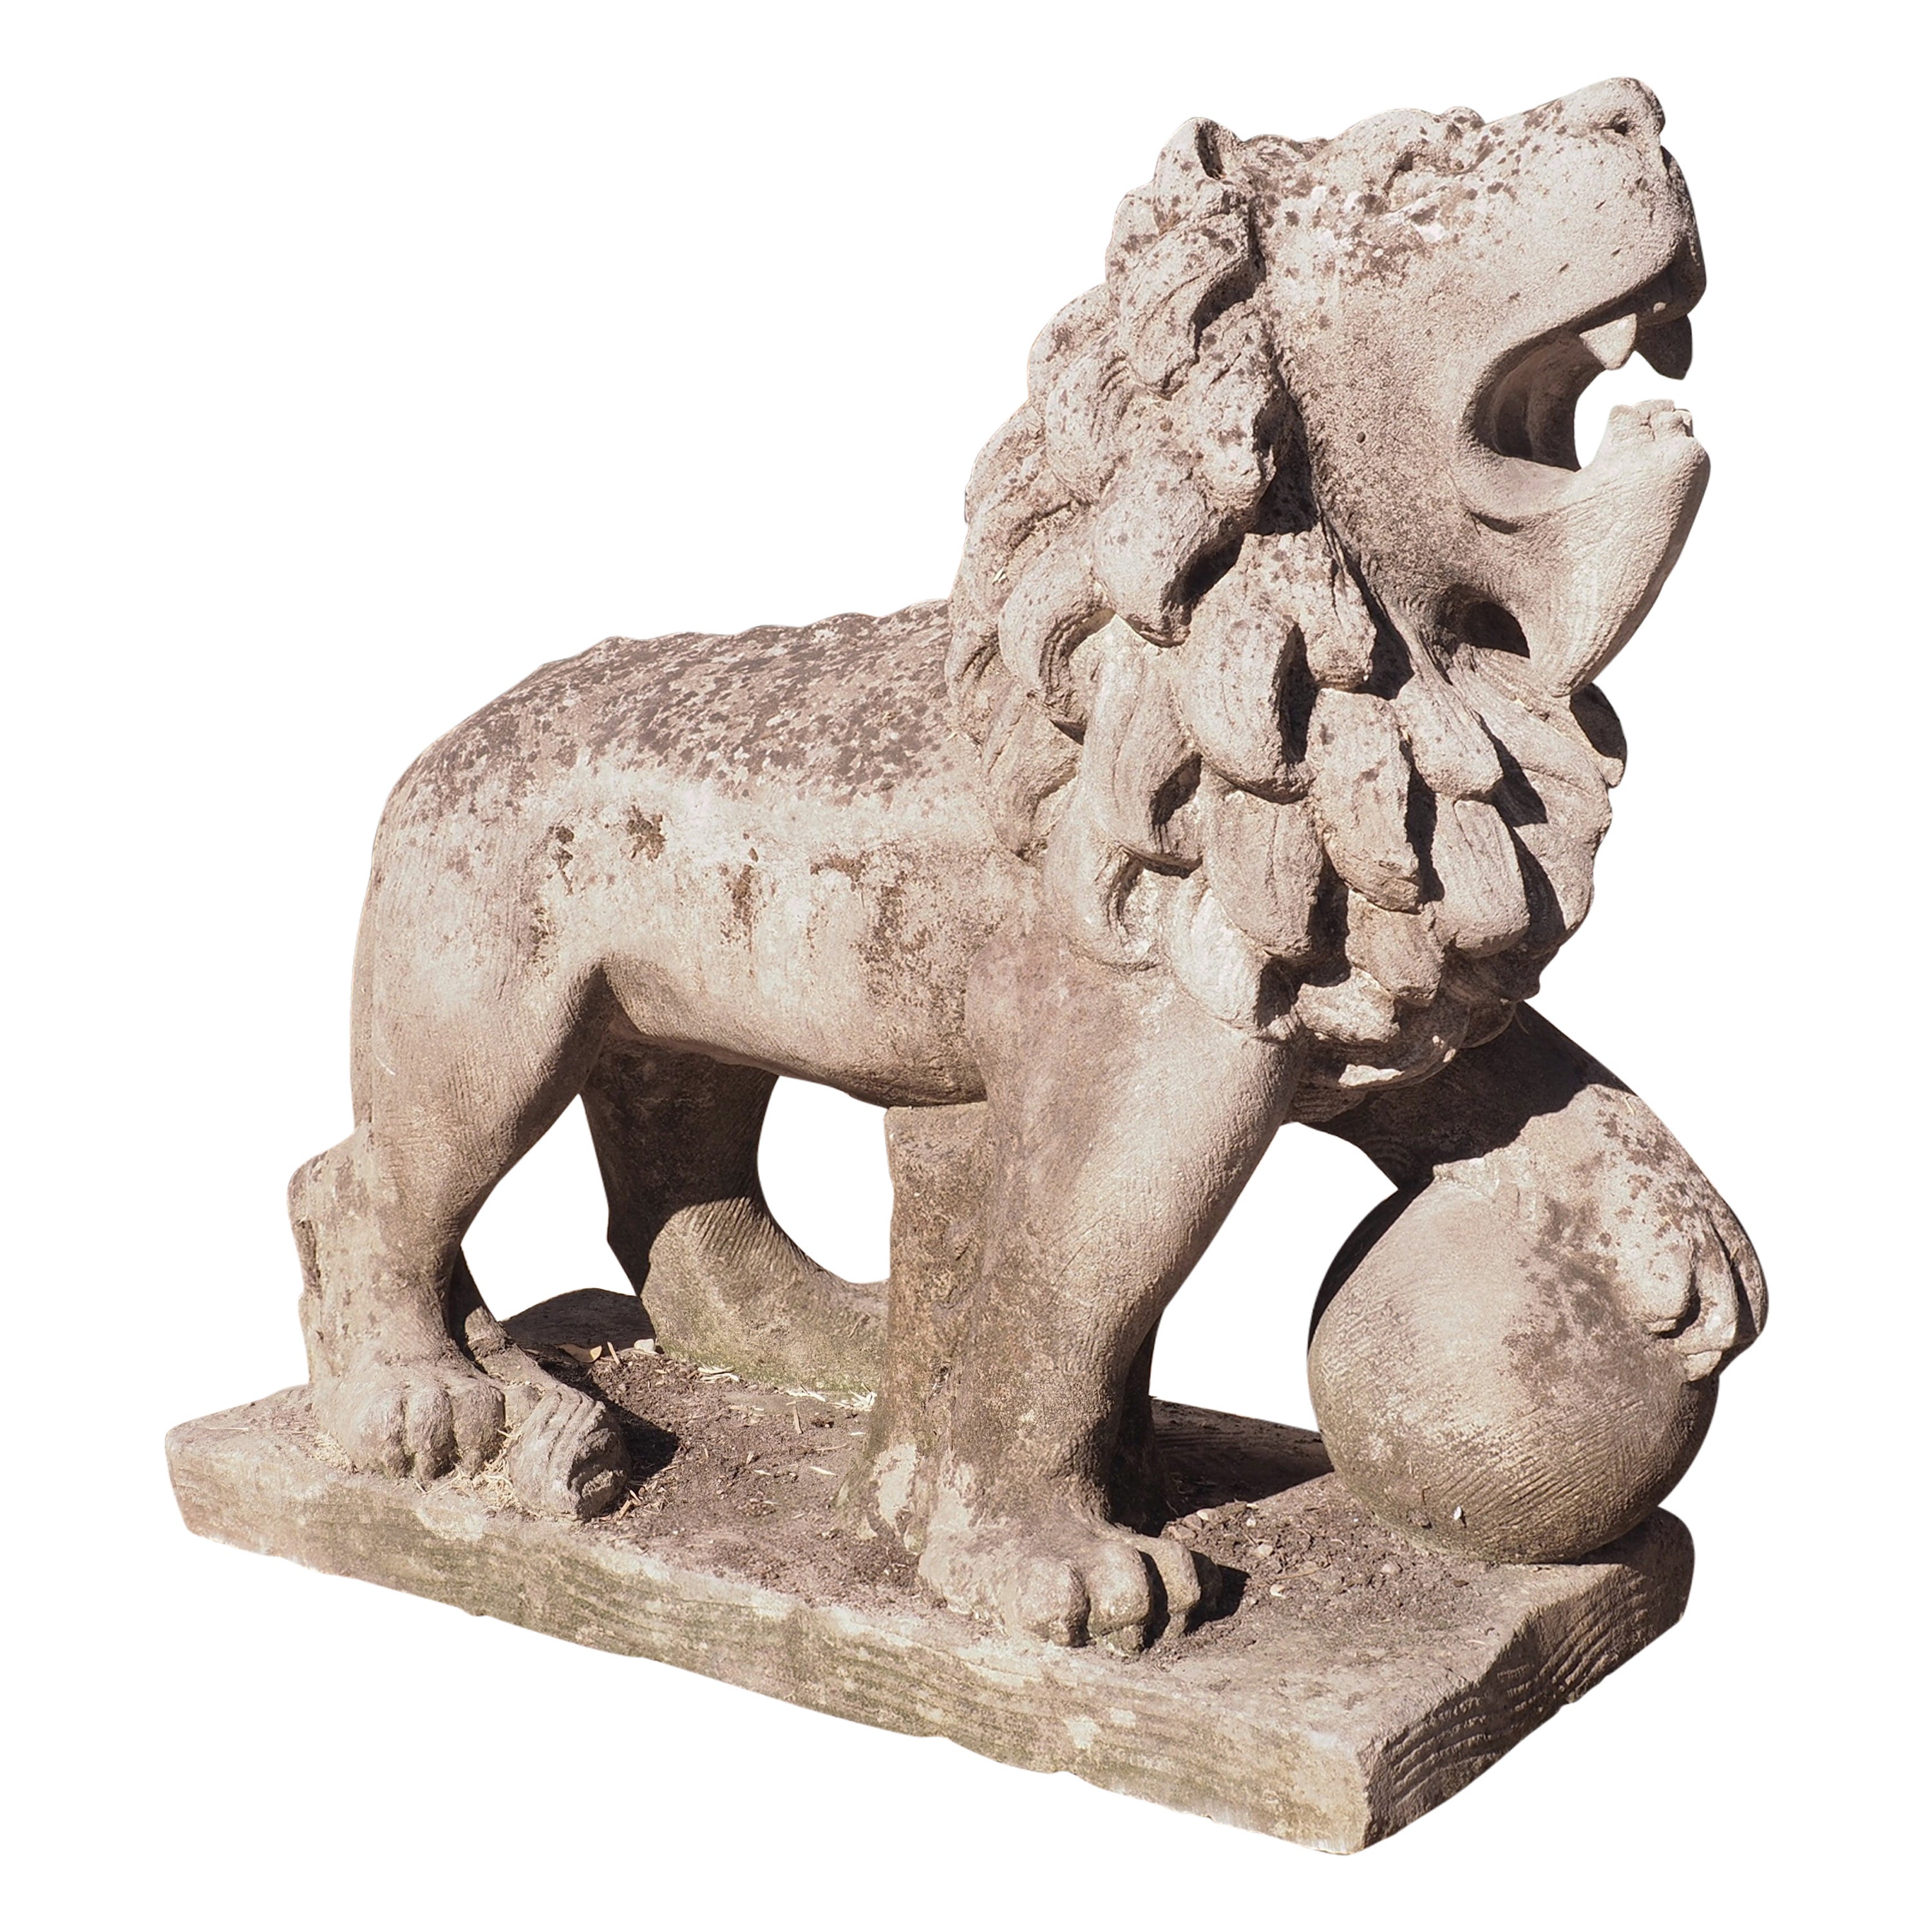 Carved Stone Medici Lion Fountain Element from Veneto, Italy